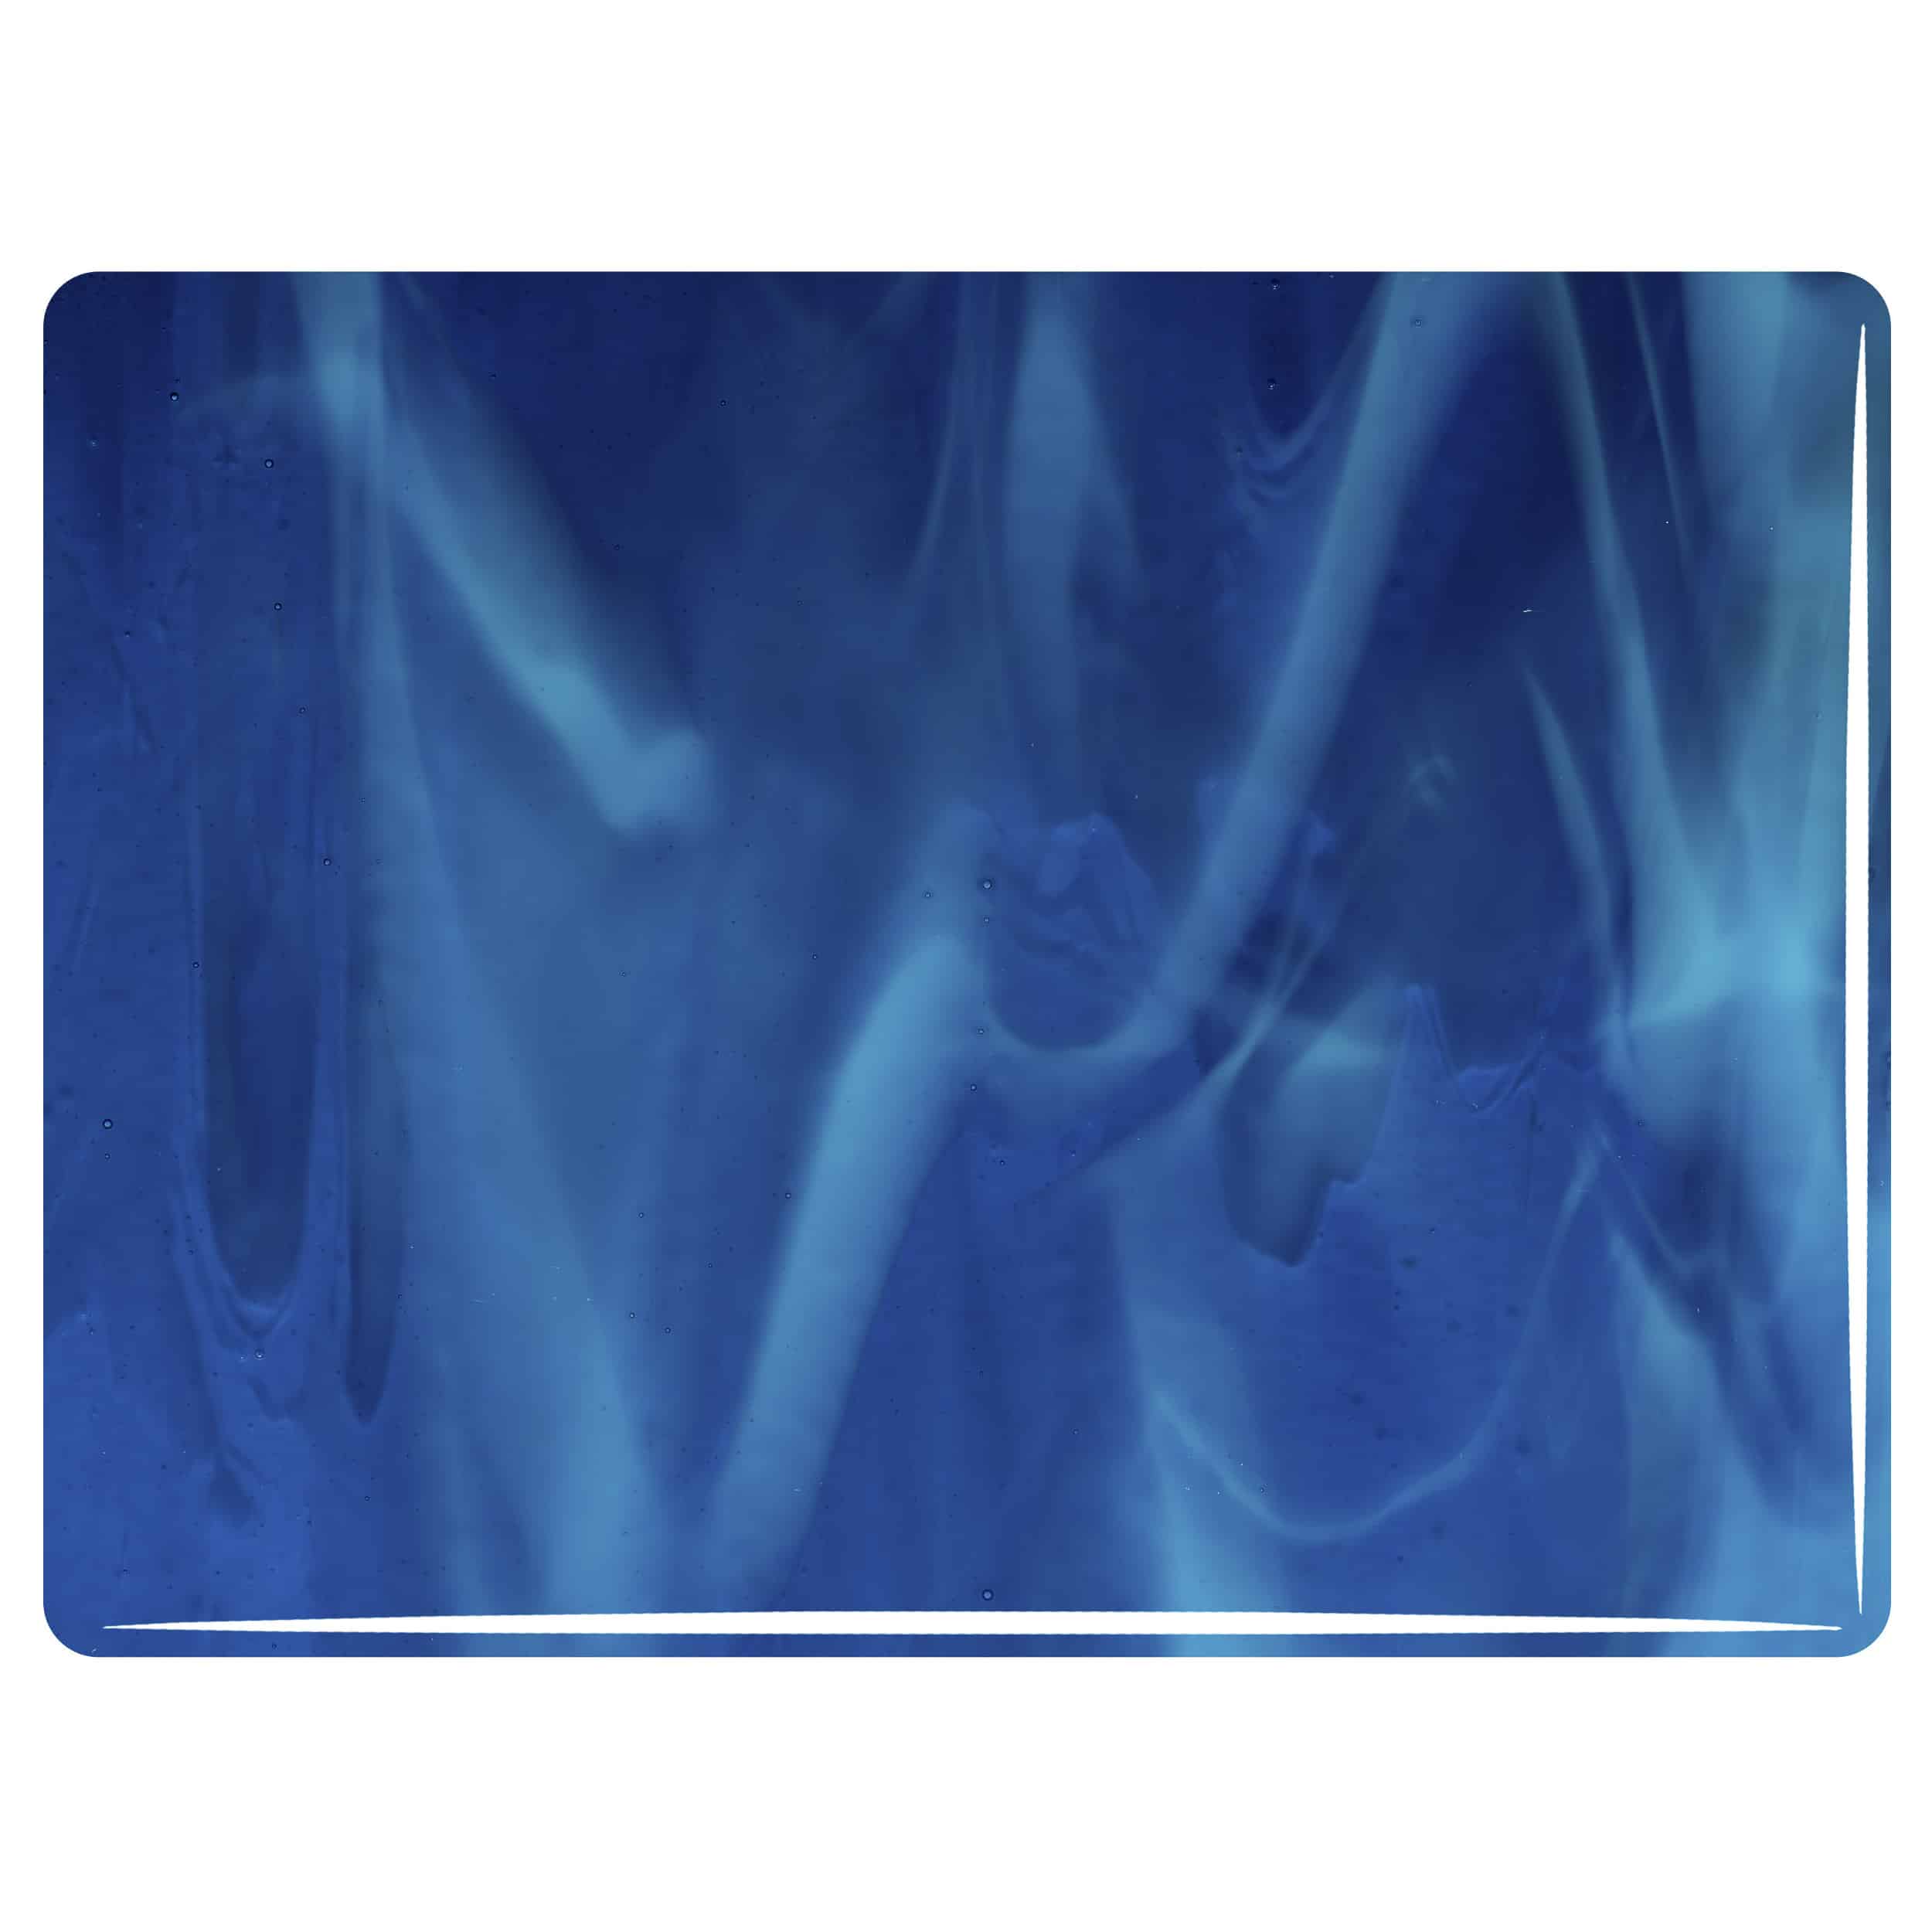 002146 Copper Blue Transparent, White Opal Streaky fused tile